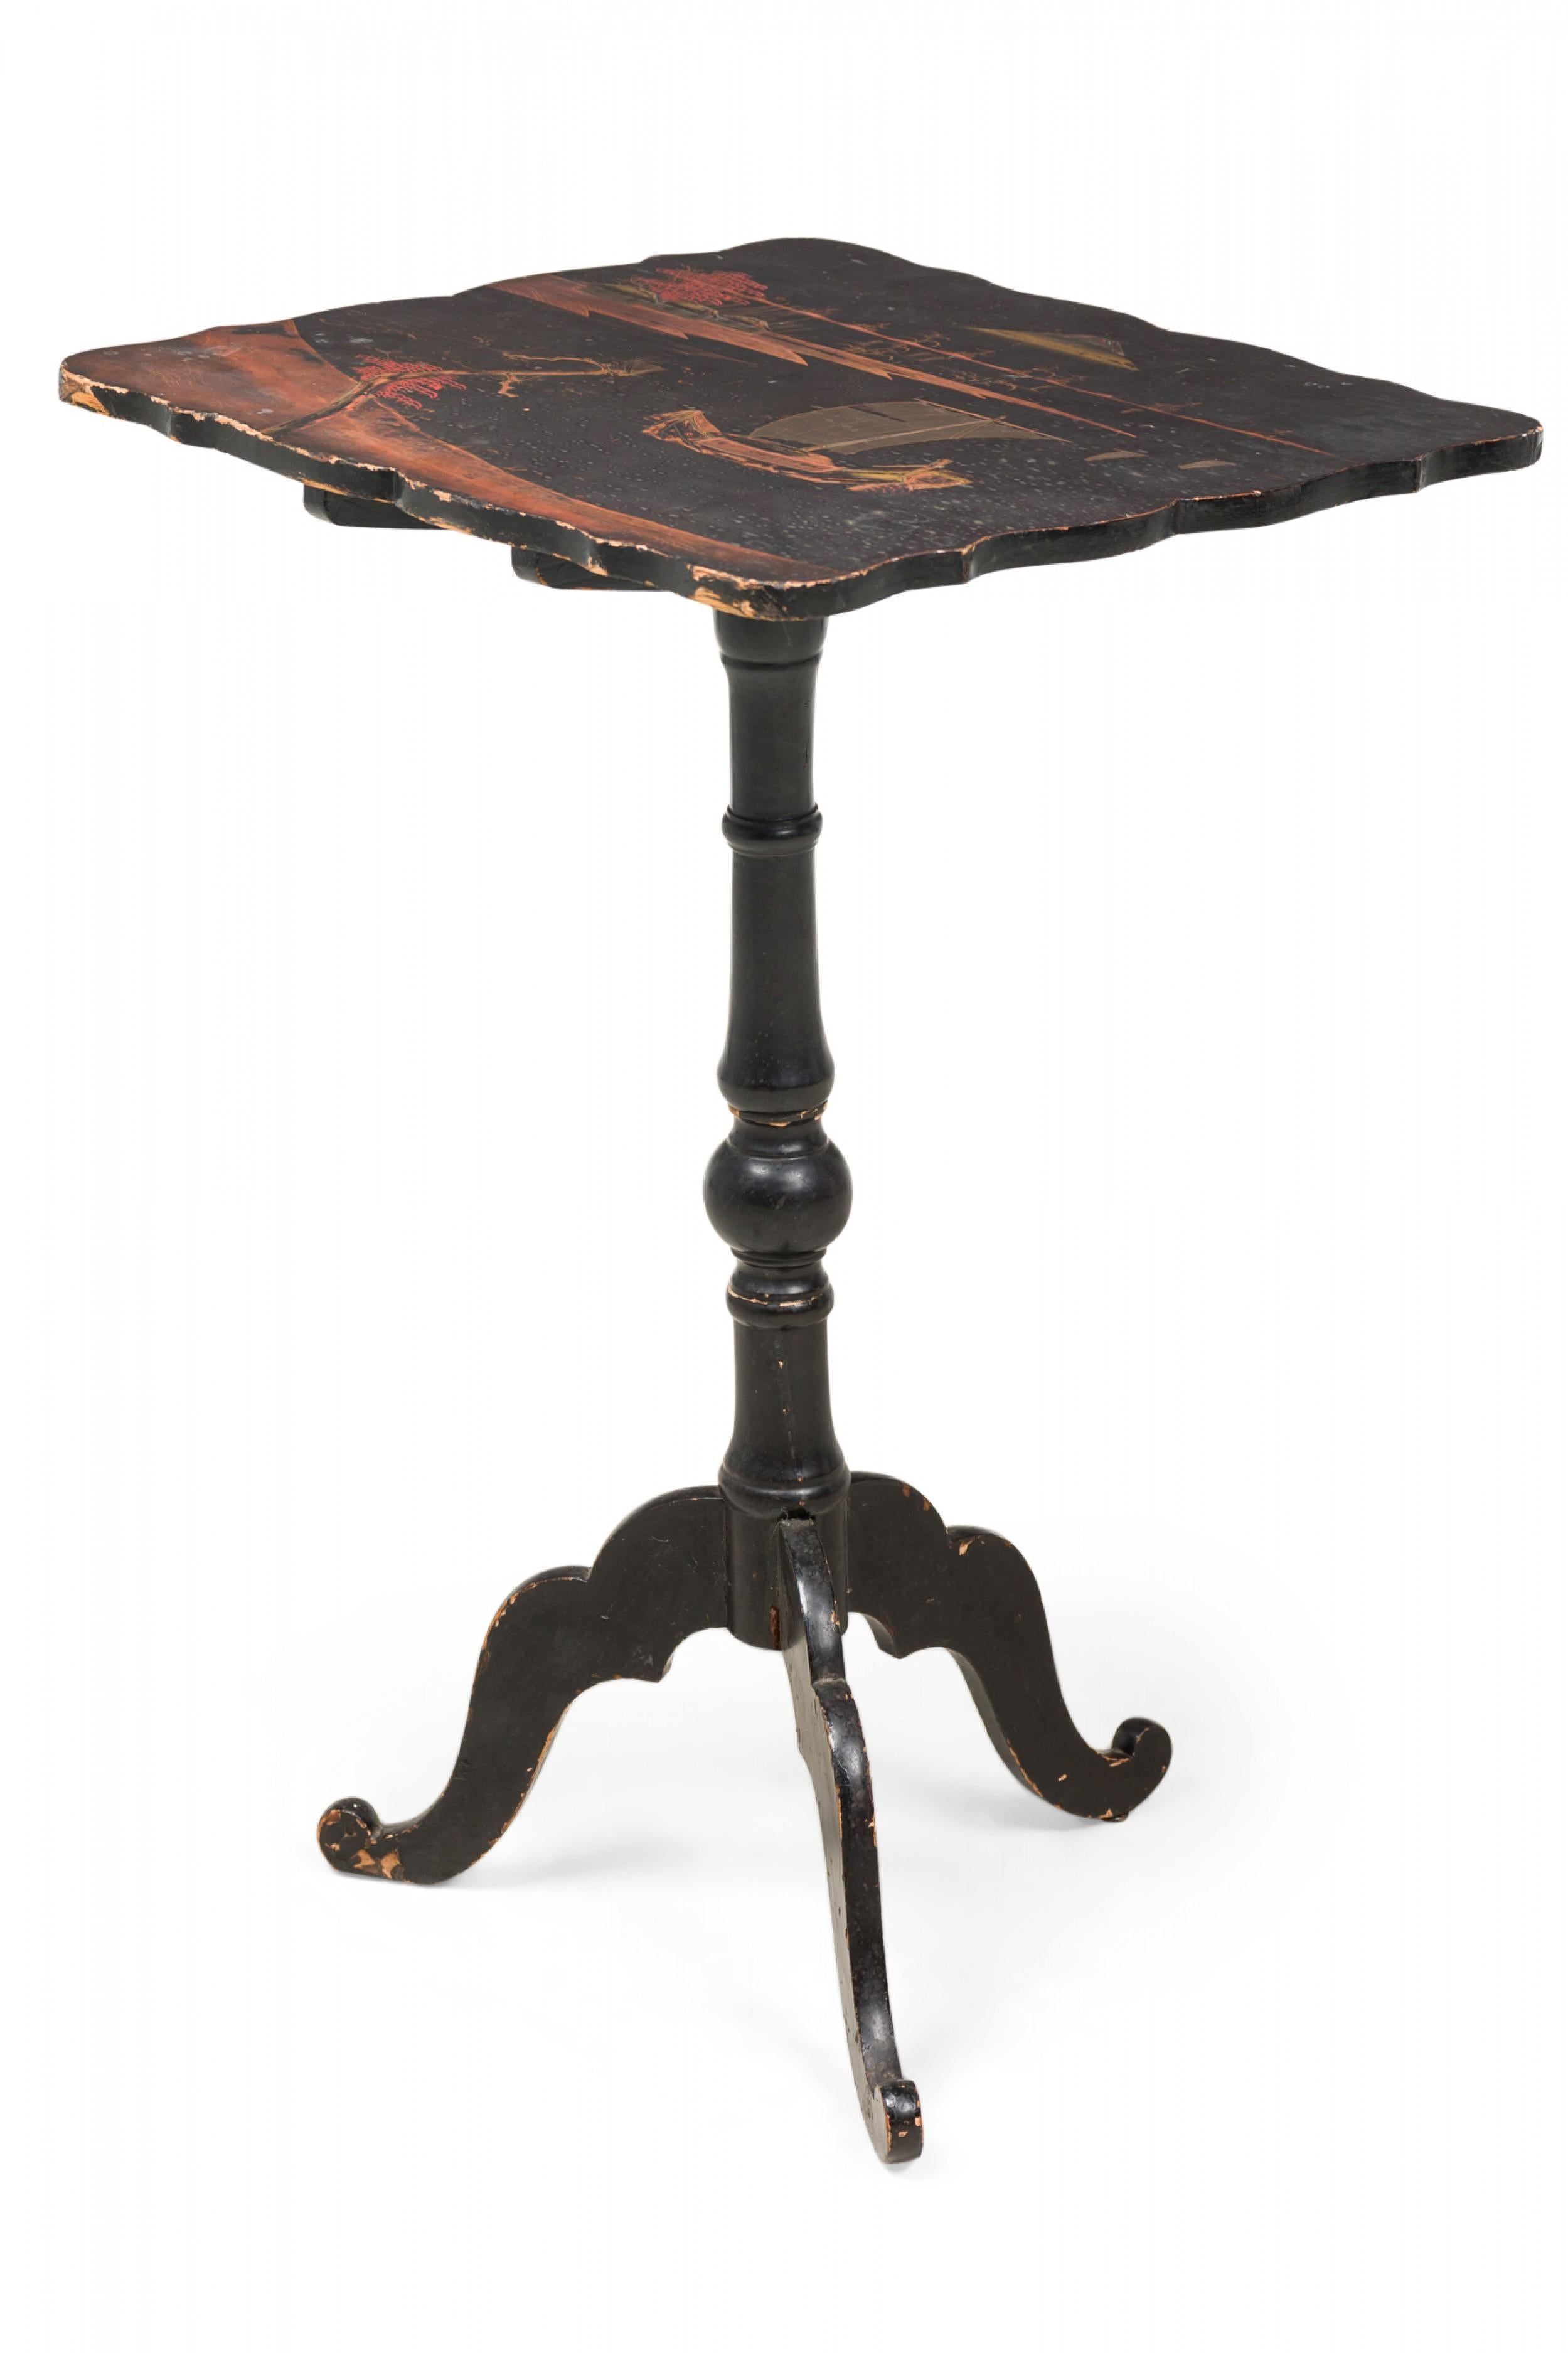 English George III Japanned tilt top end / side table featuring a tabletop with a scalloped edge decorated with a painted and gilt pastoral scene of boats on water with a mountain in the distance, resting on a turned pedestal with three shaped